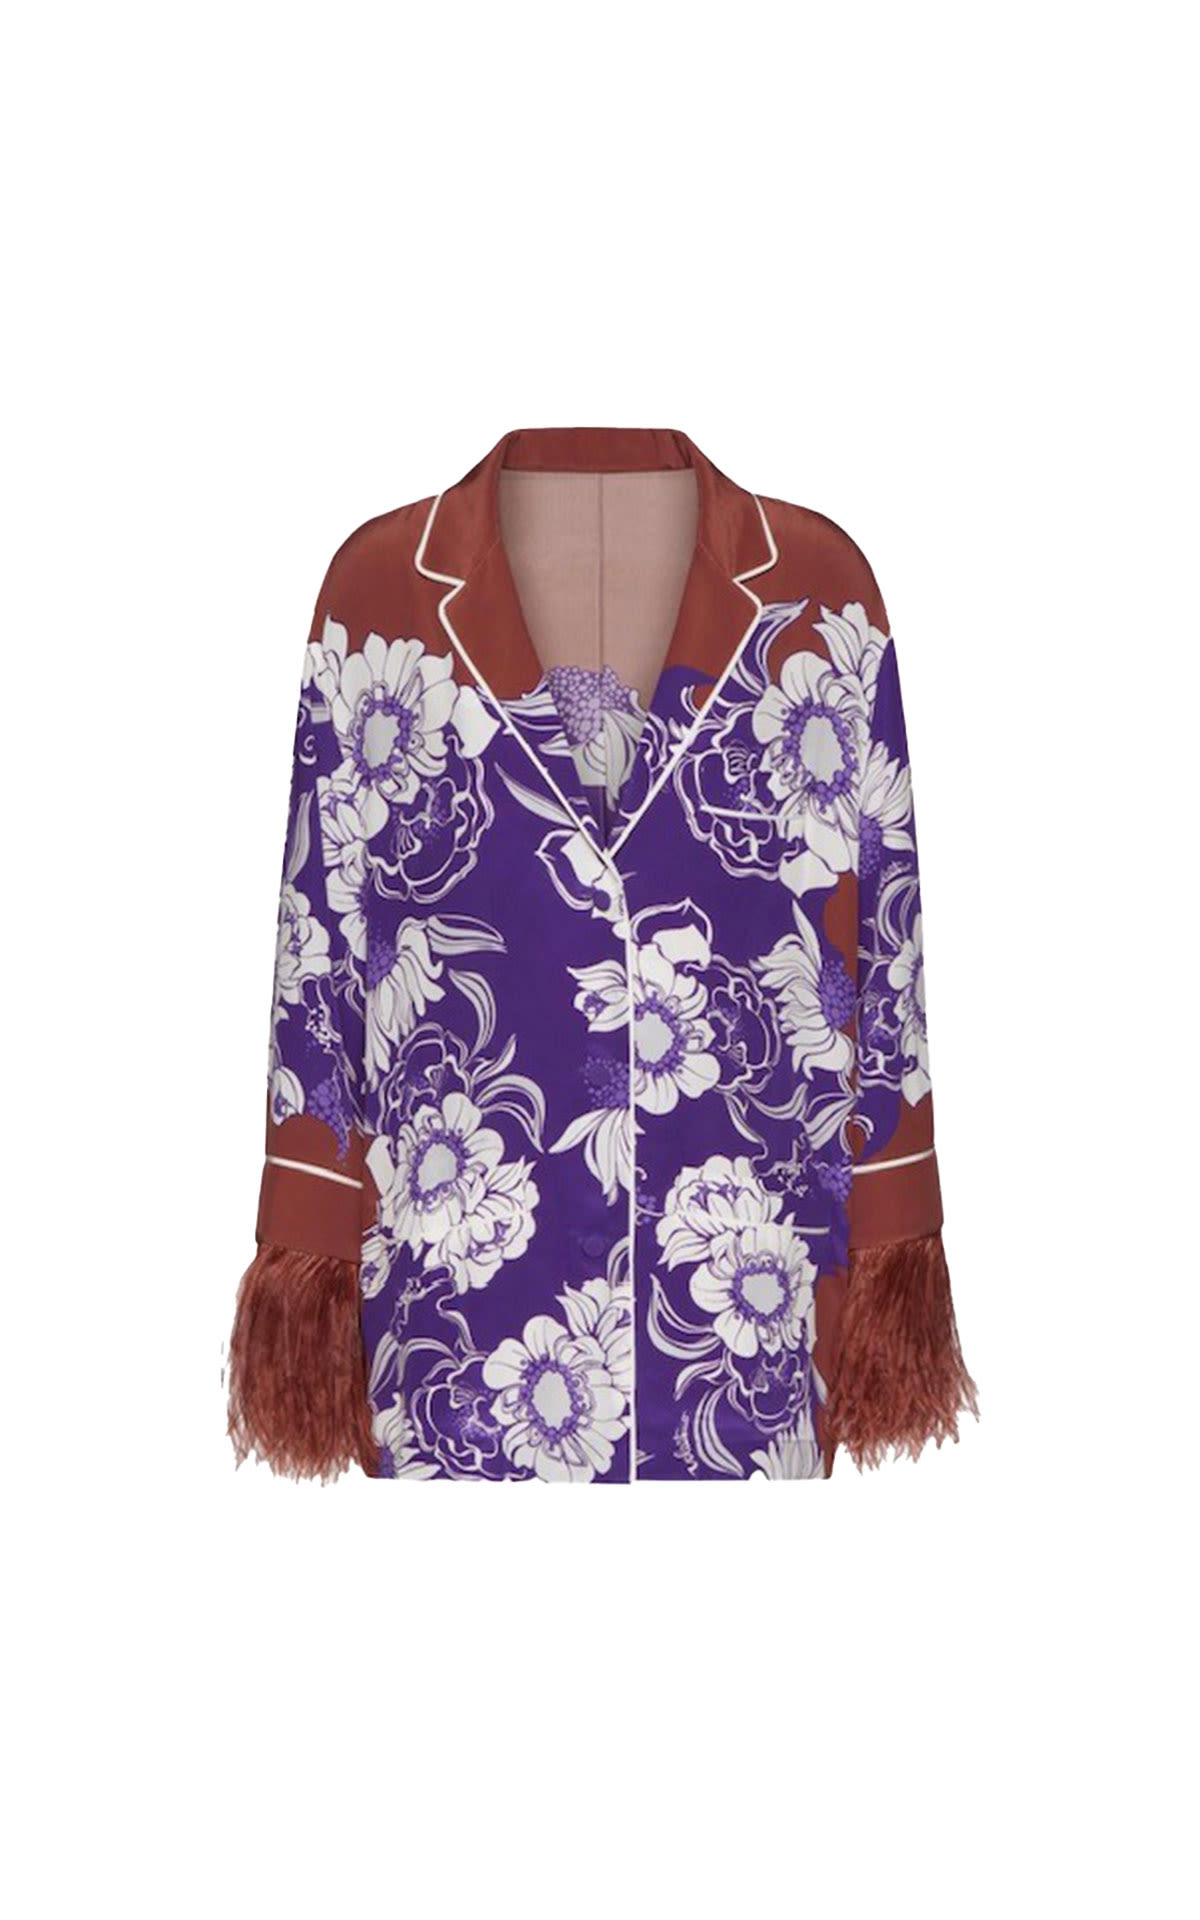 Valentino Crepe de chine pajama shirt with street flower daisyland print from Bicester Village